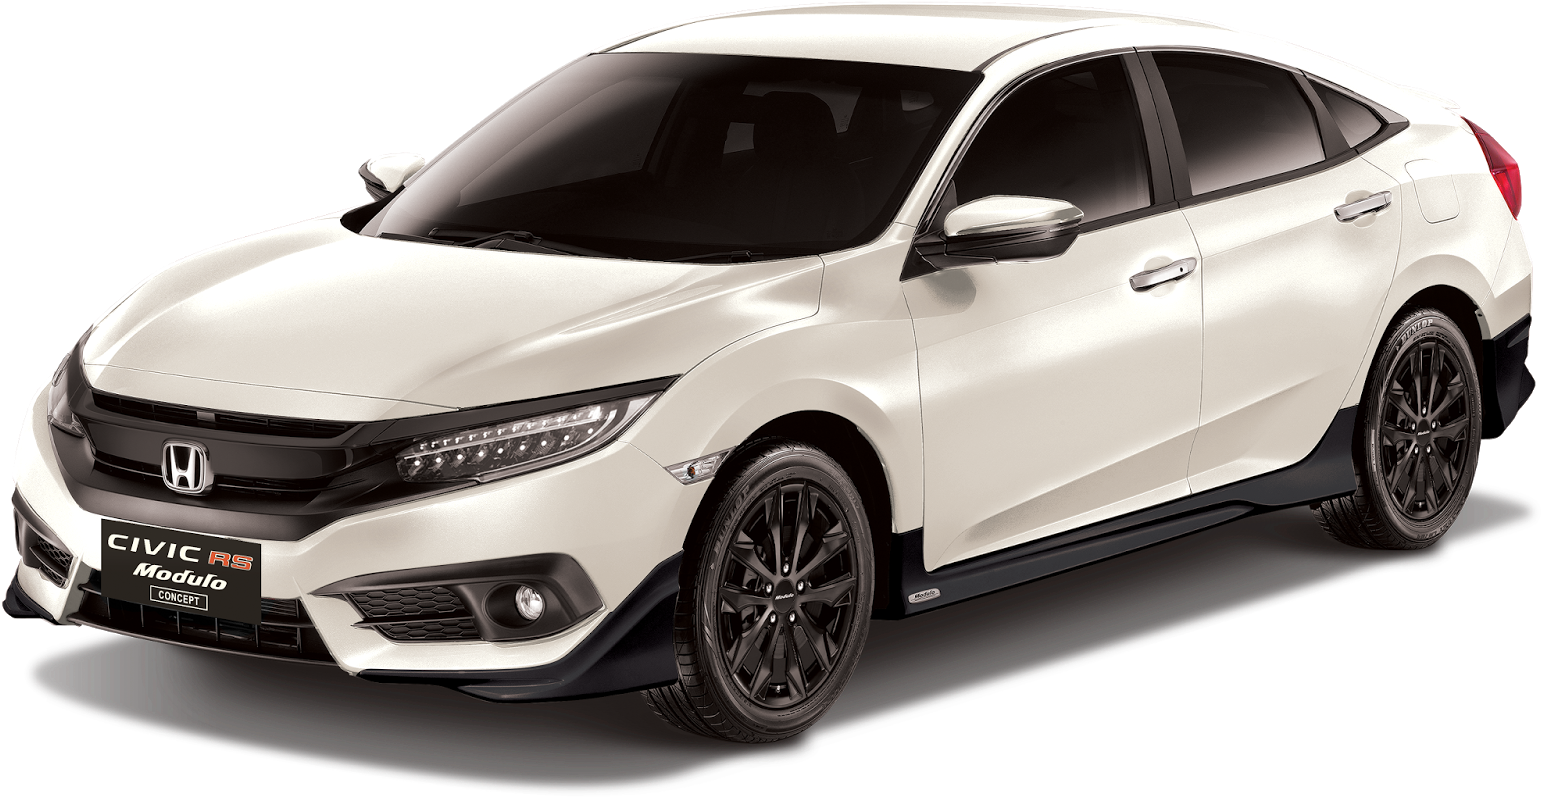 All-new Civic Rs Modulo Concept - Honda Civic 1.8 S 2018 Clipart (1600x1131), Png Download